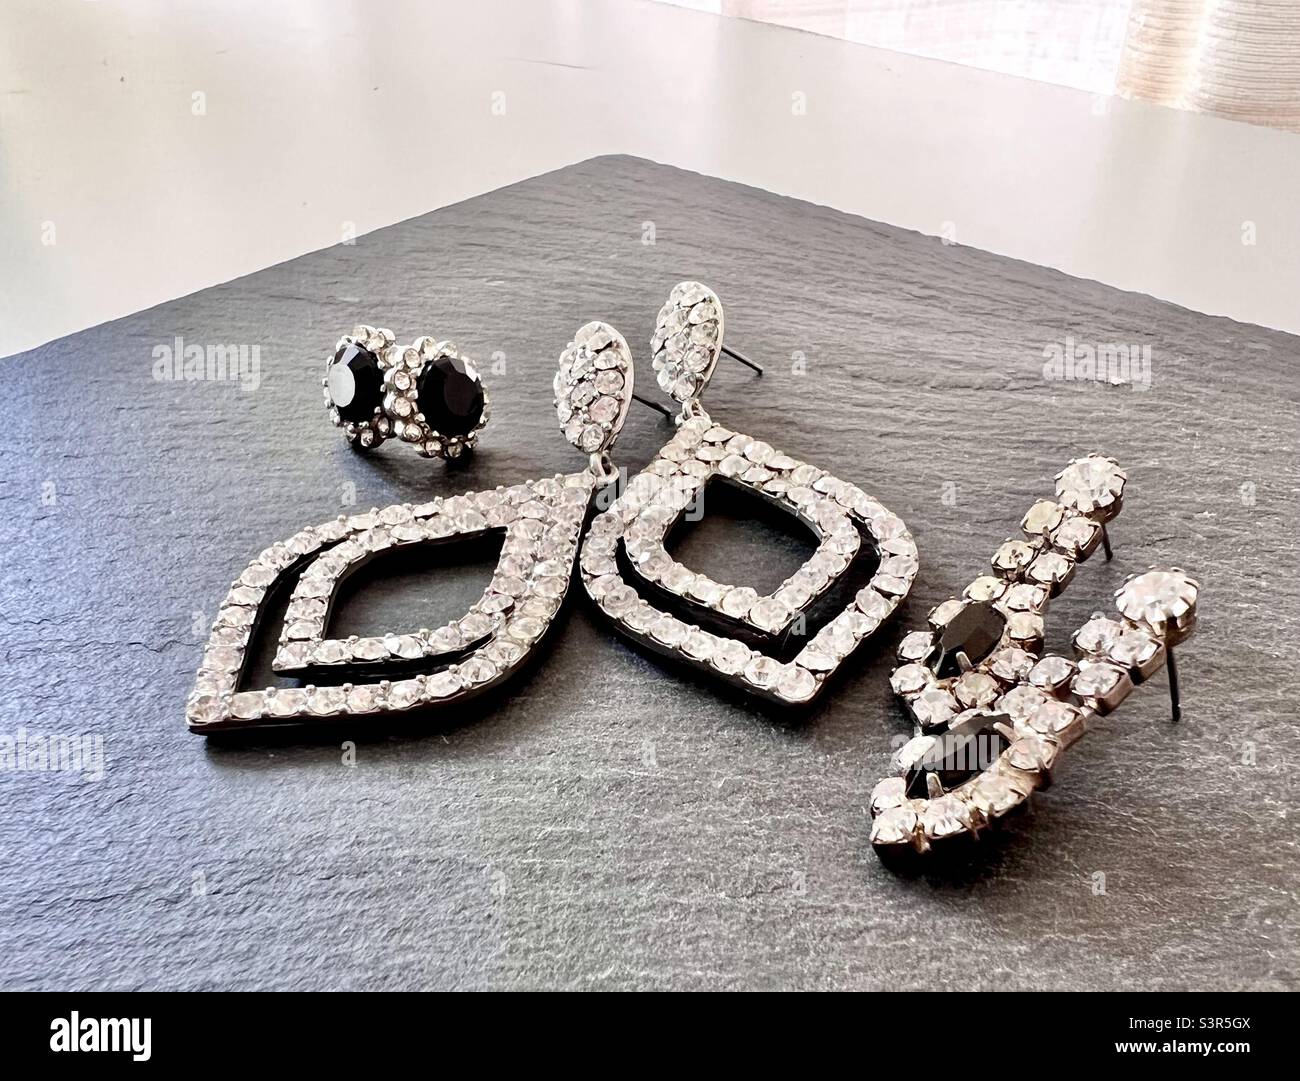 Still life photography of costume jewelry, earrings displayed on gray slate with white background Stock Photo